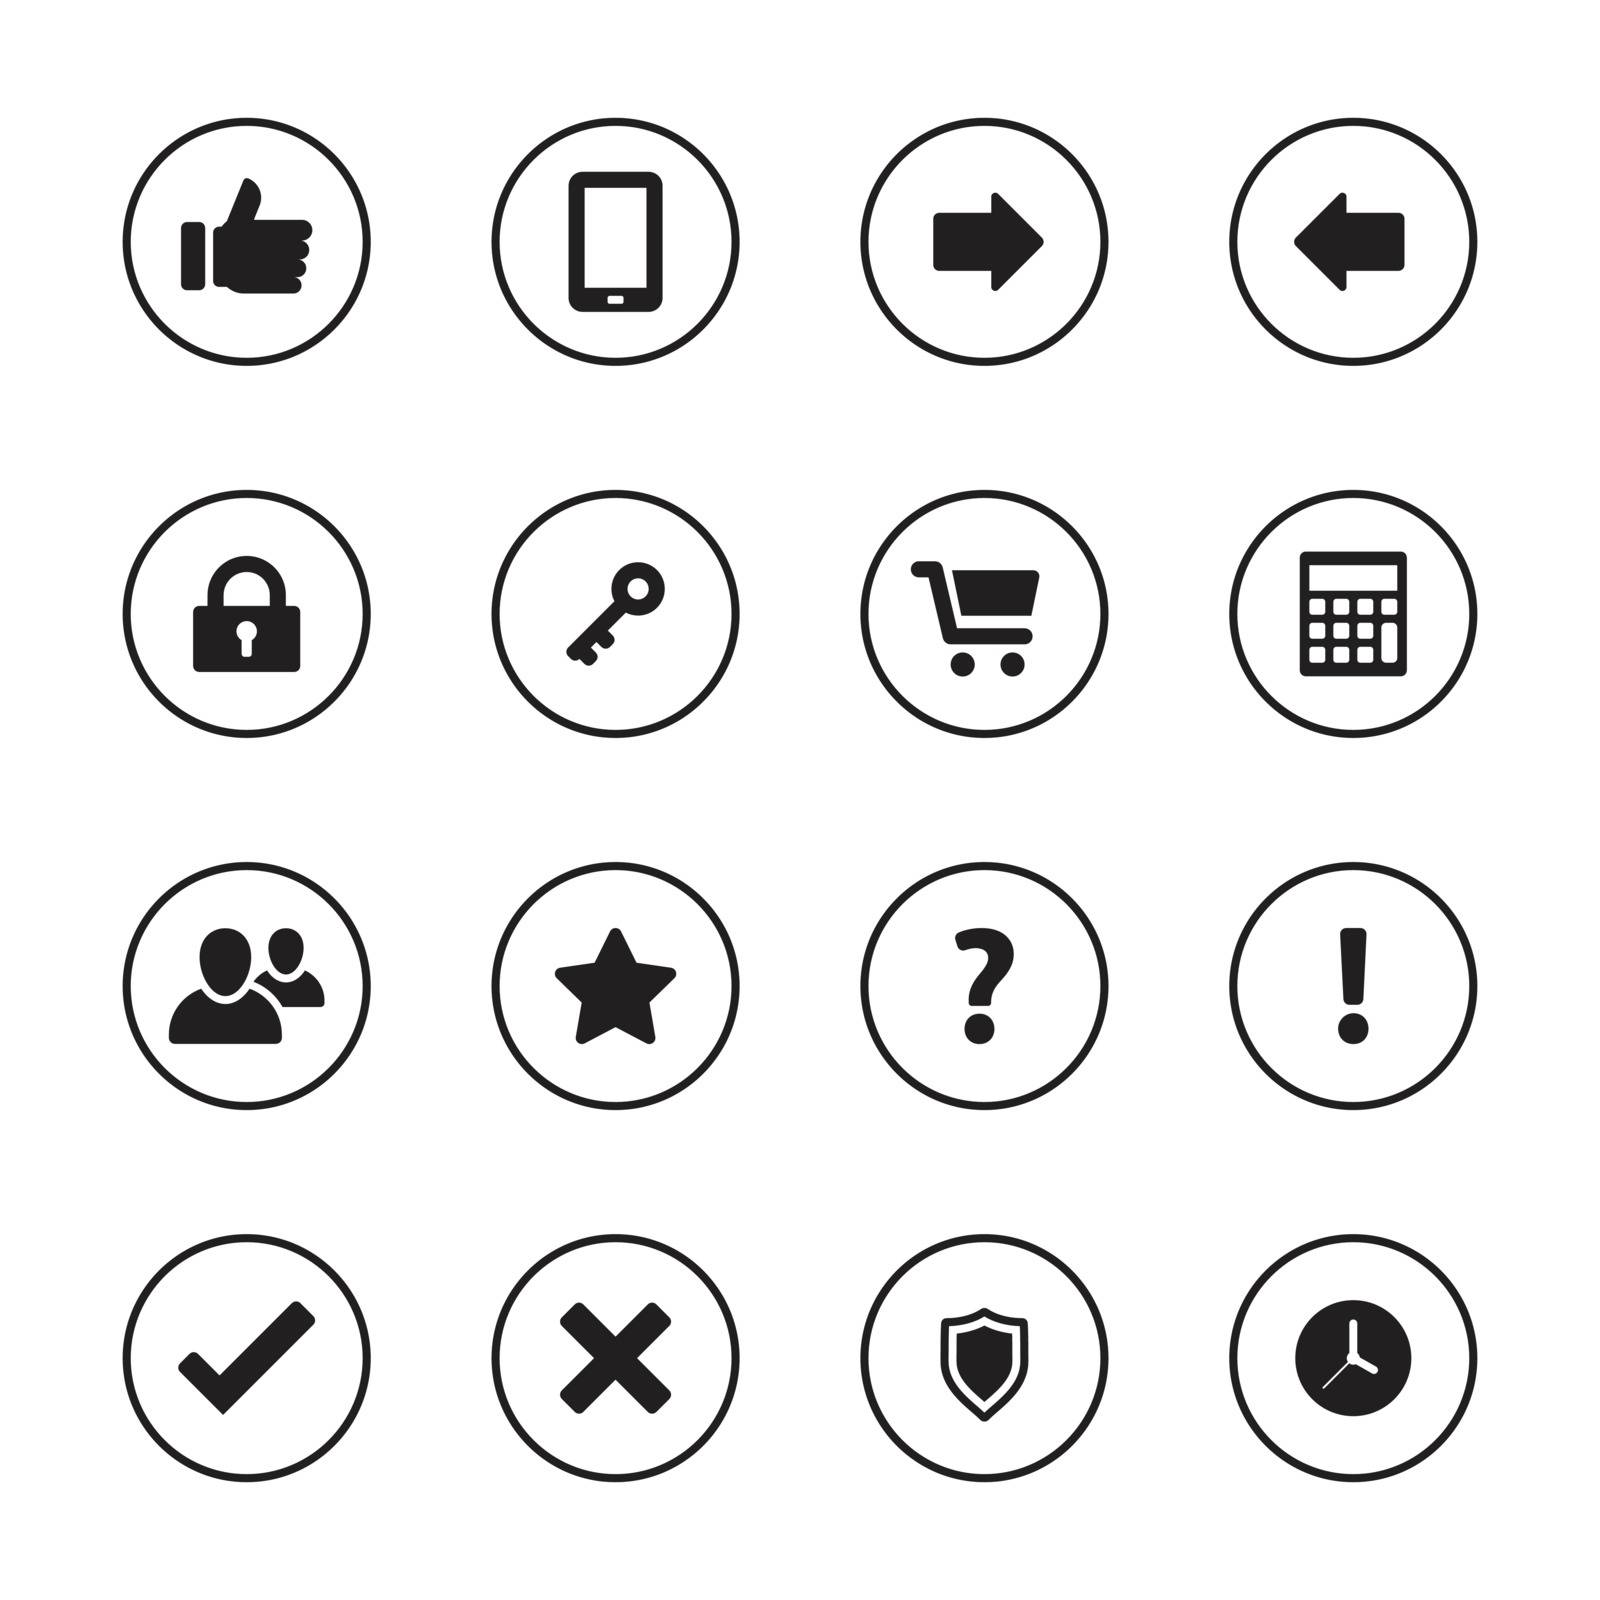 black flat miscellaneous icon set with circle frame for web design, user interface (UI), infographic and mobile application (apps)